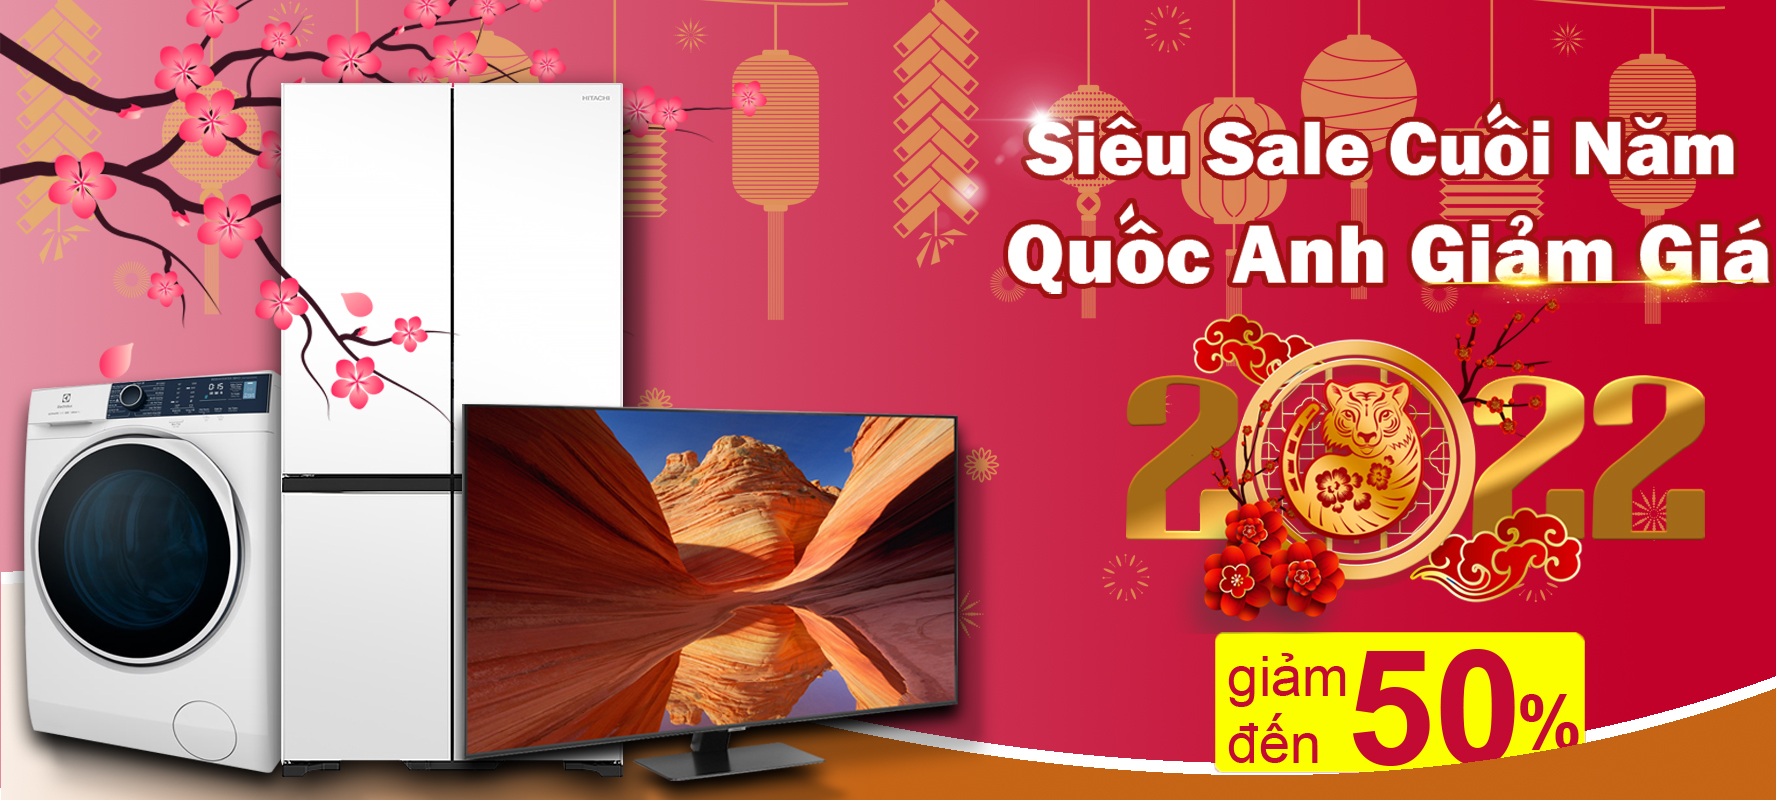 Banner Quoc Anh Tet